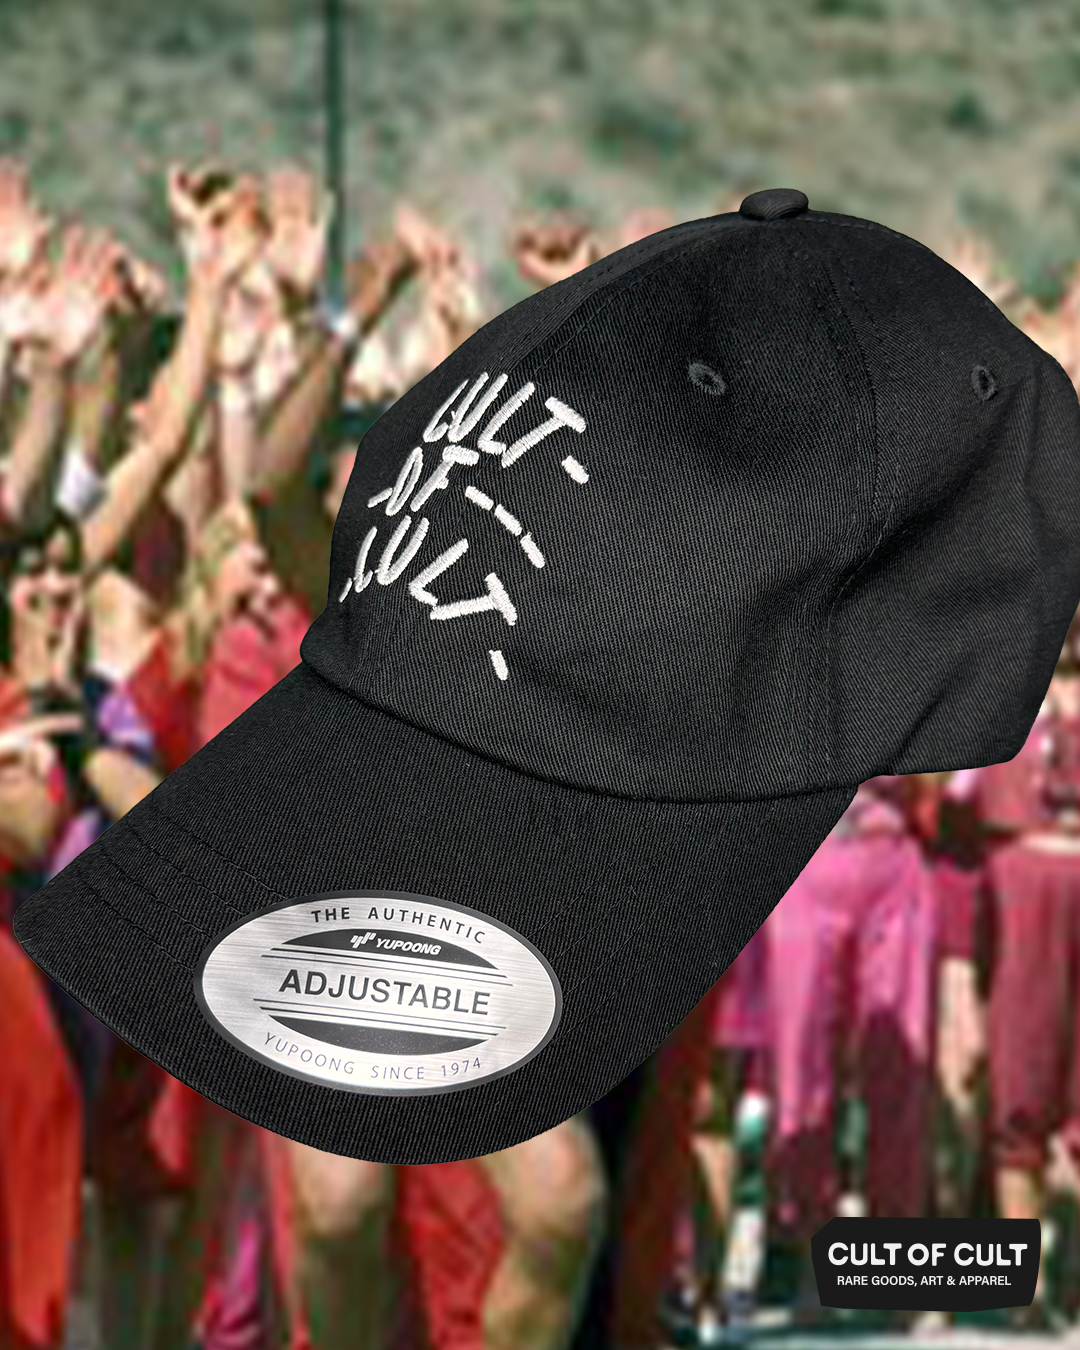 a side view of the front of the black Cult of Cult hat